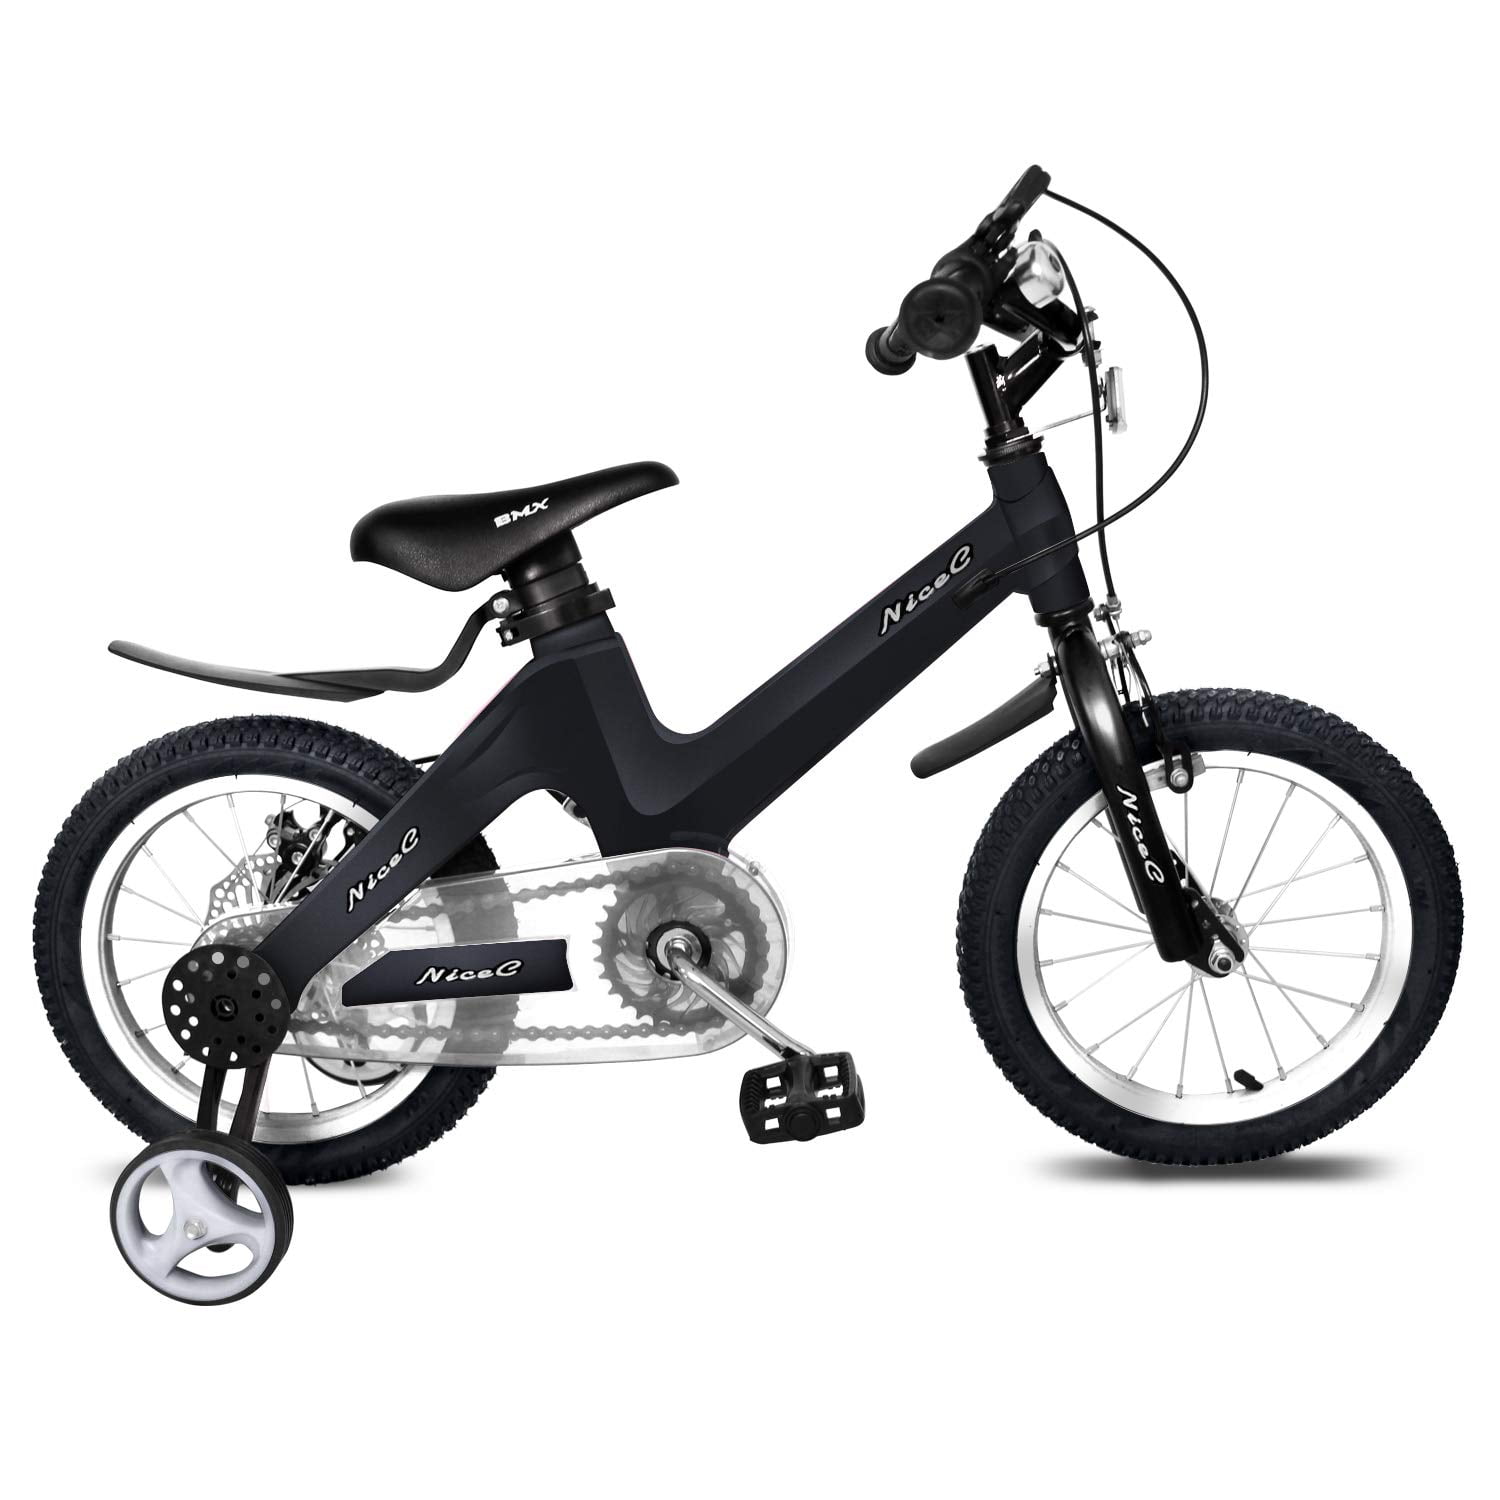 Wangkangyi Children's Bicycle 12 Inch Unisex Children's Bicycle with Front and Rear Brake and Stabilisers for Children V-Brake Front Stabilisers Pneumatic Tyres from 2-9